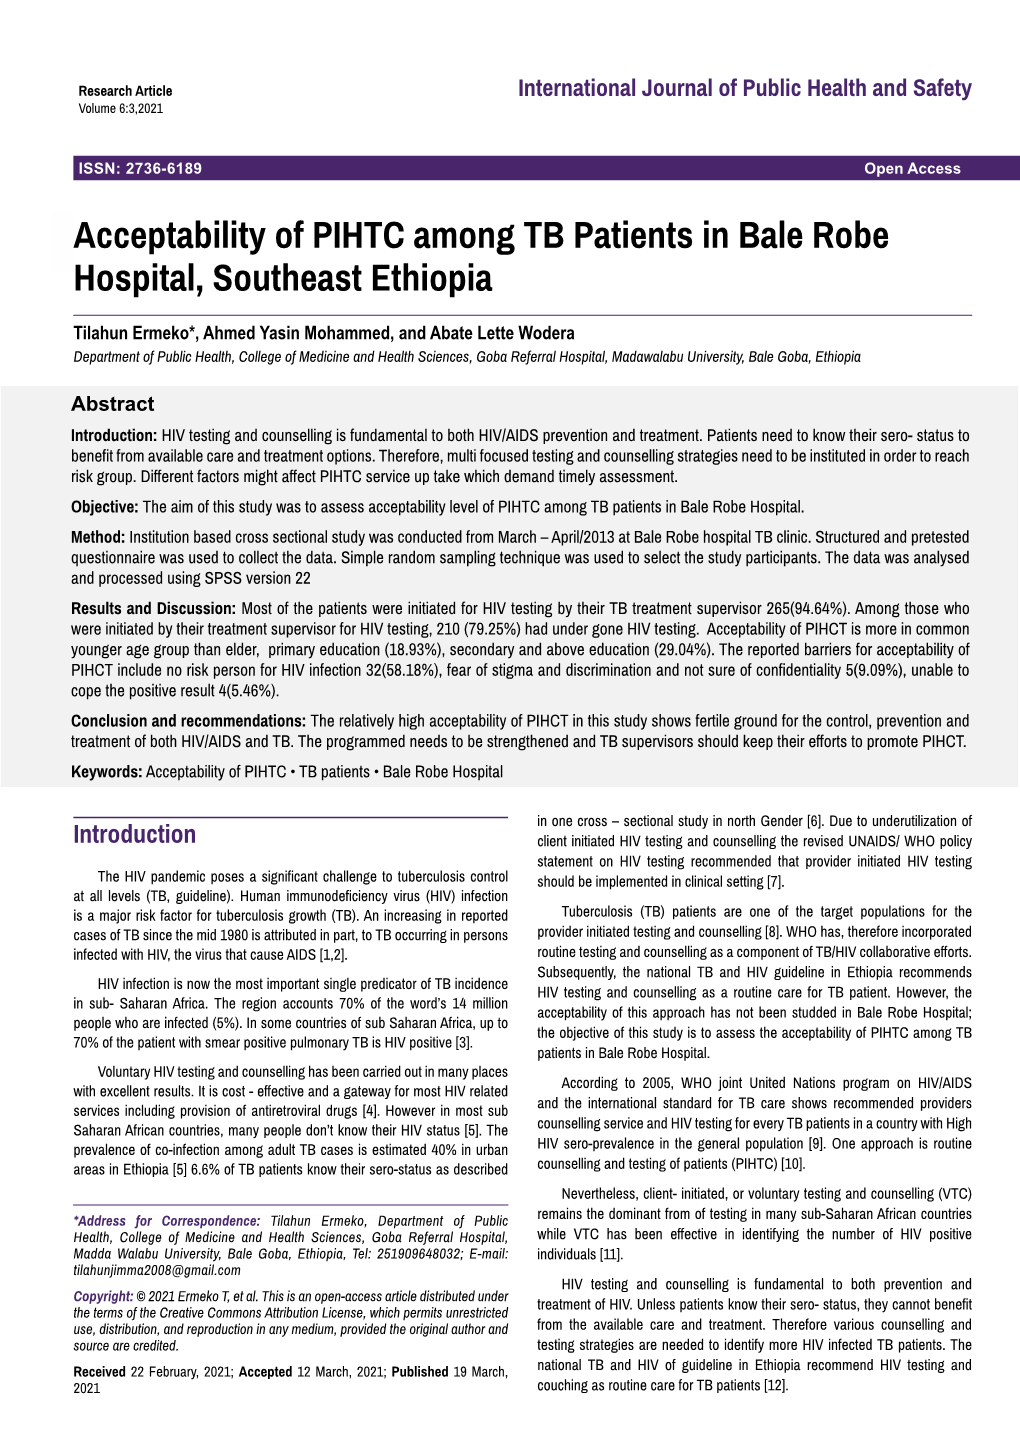 Acceptability of PIHTC Among TB Patients in Bale Robe Hospital, Southeast Ethiopia